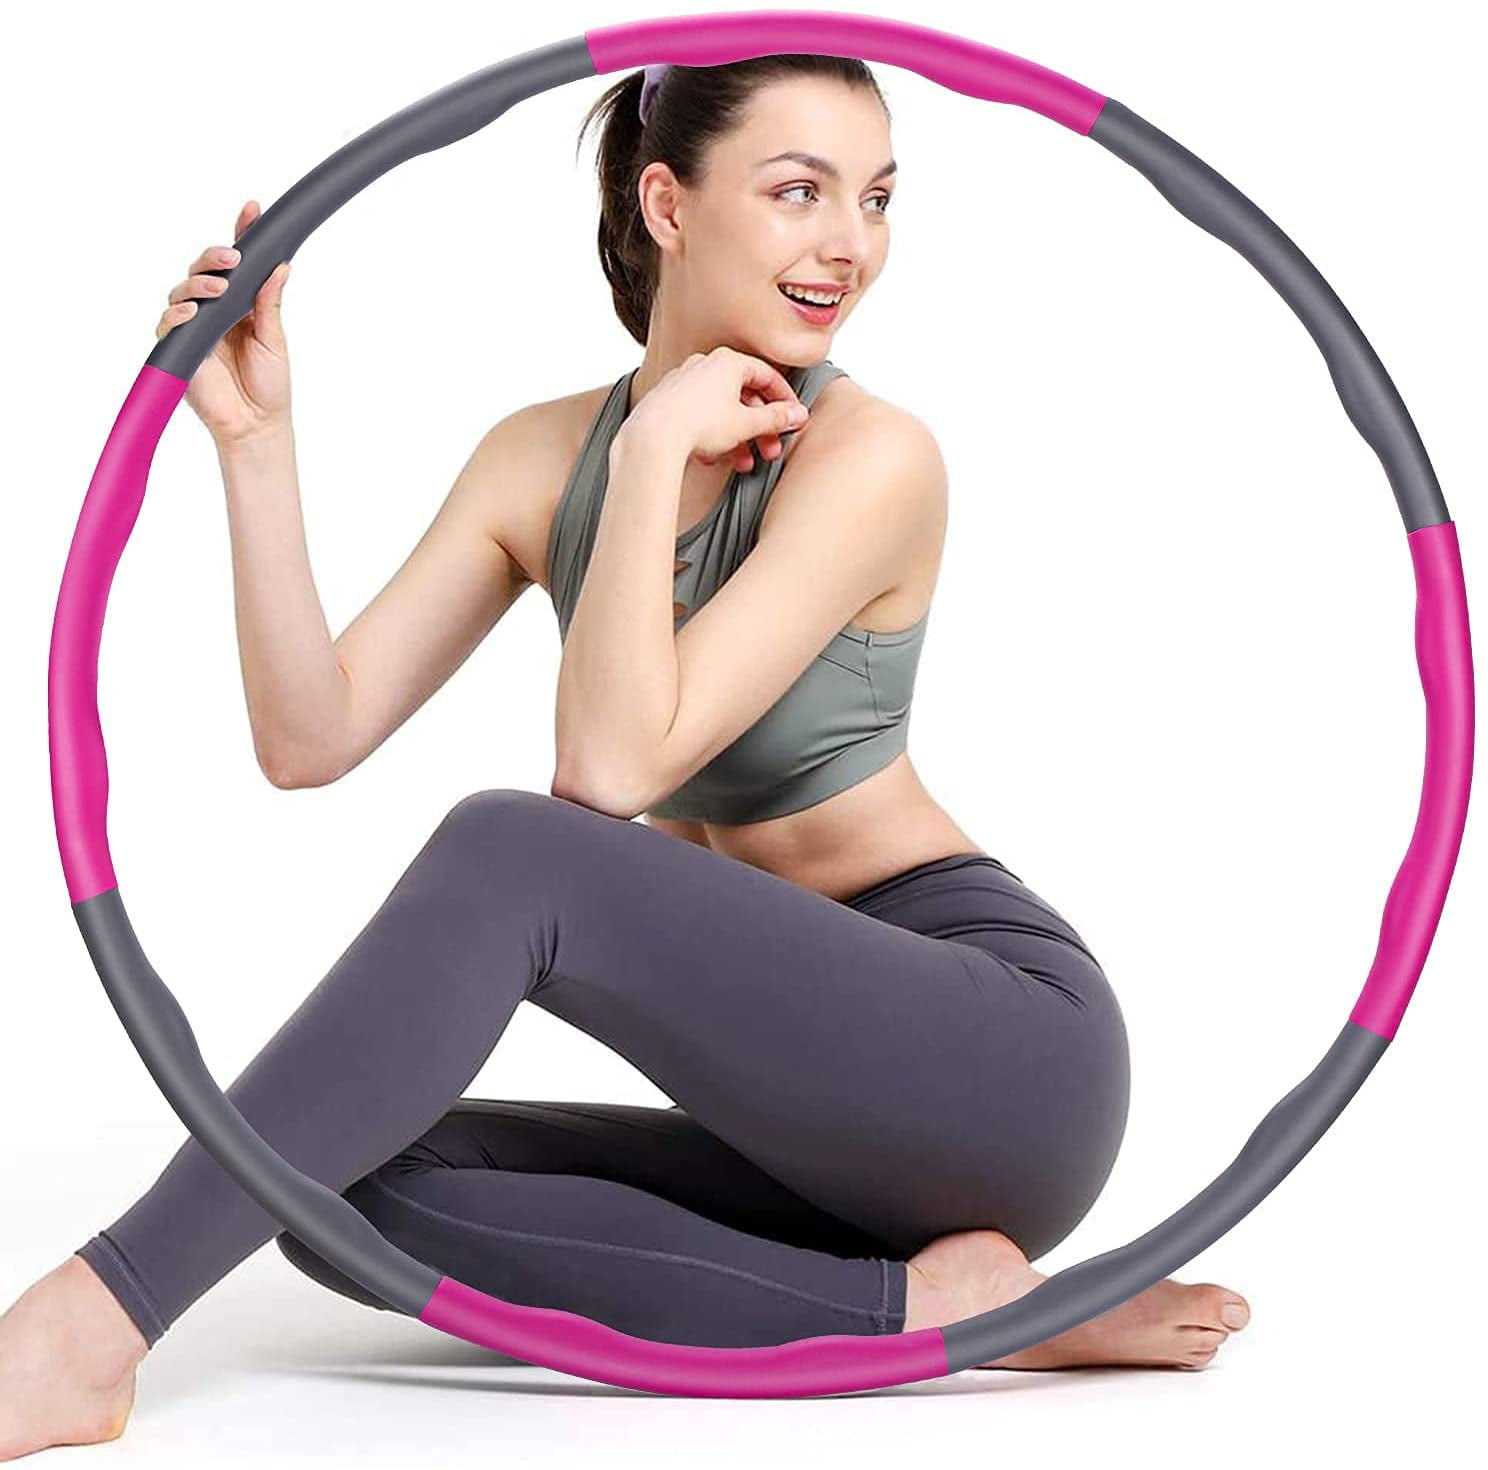 KUAJING Weighted Hula for Adults Hoop Heavy Adjustable Healthy Workout Weighted Loss Hoola for Women Exercise Fitness Gymnastics Equipment for Home 8 Section Detachable Purple Gray 